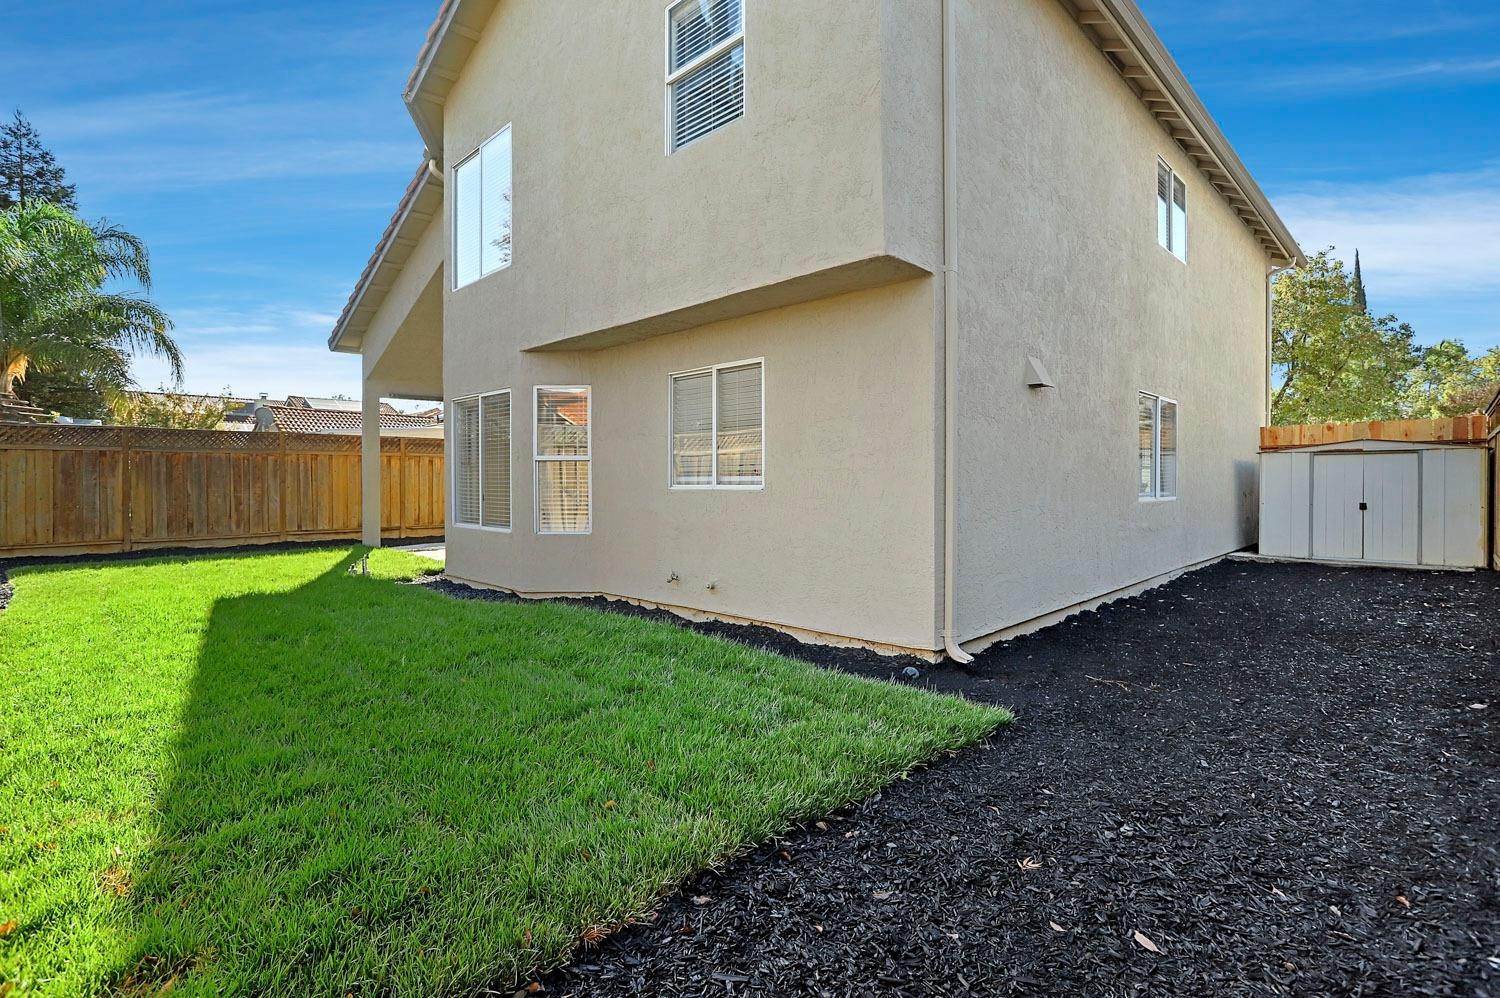 45. Single Family Homes for Active at 2125 Holder Lane Tracy, California 95377 United States